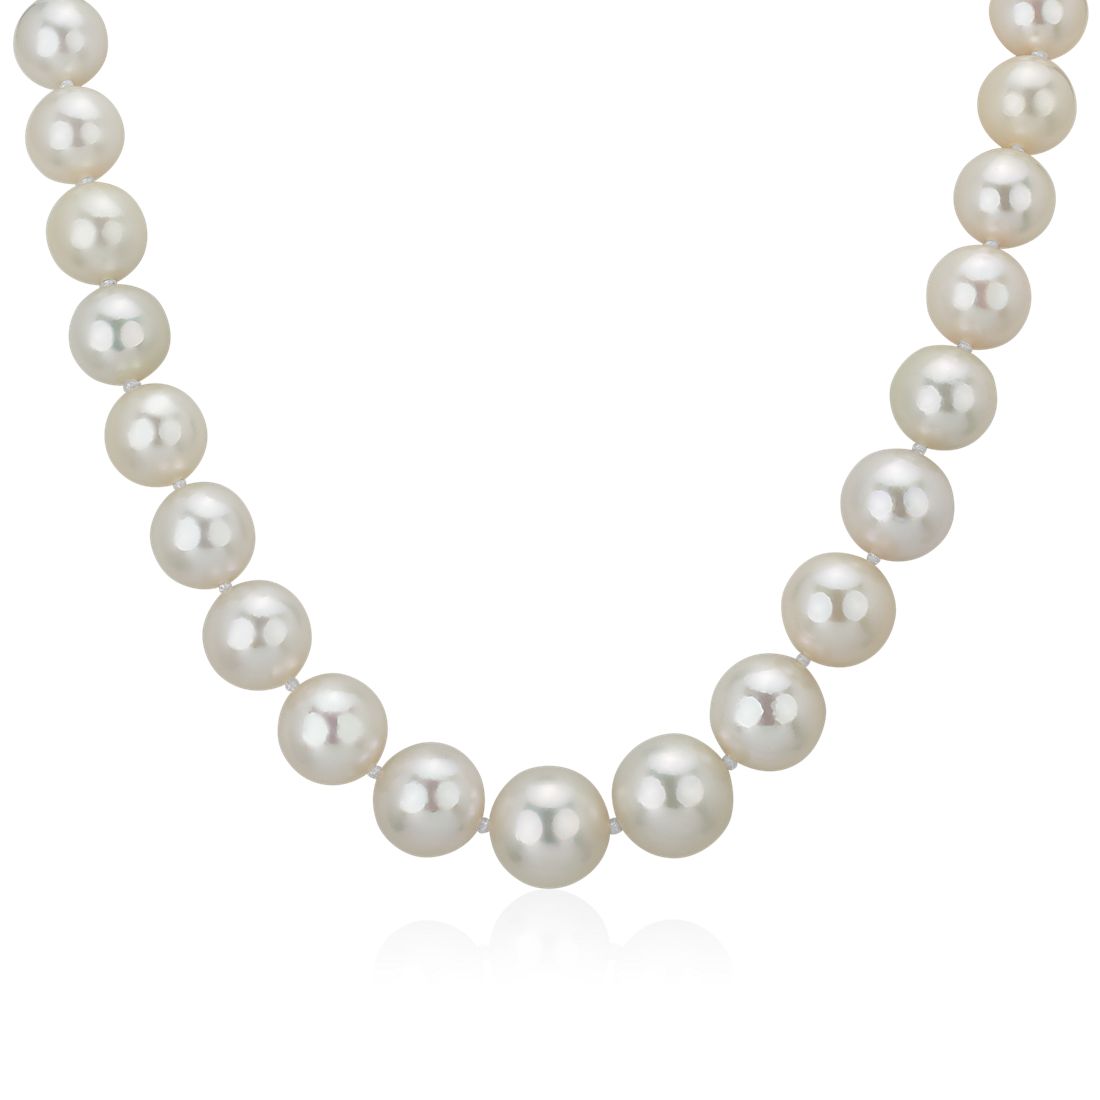 10-12.6mm Graduated South Sea Pearl Strand Necklace with Diamond Clasp